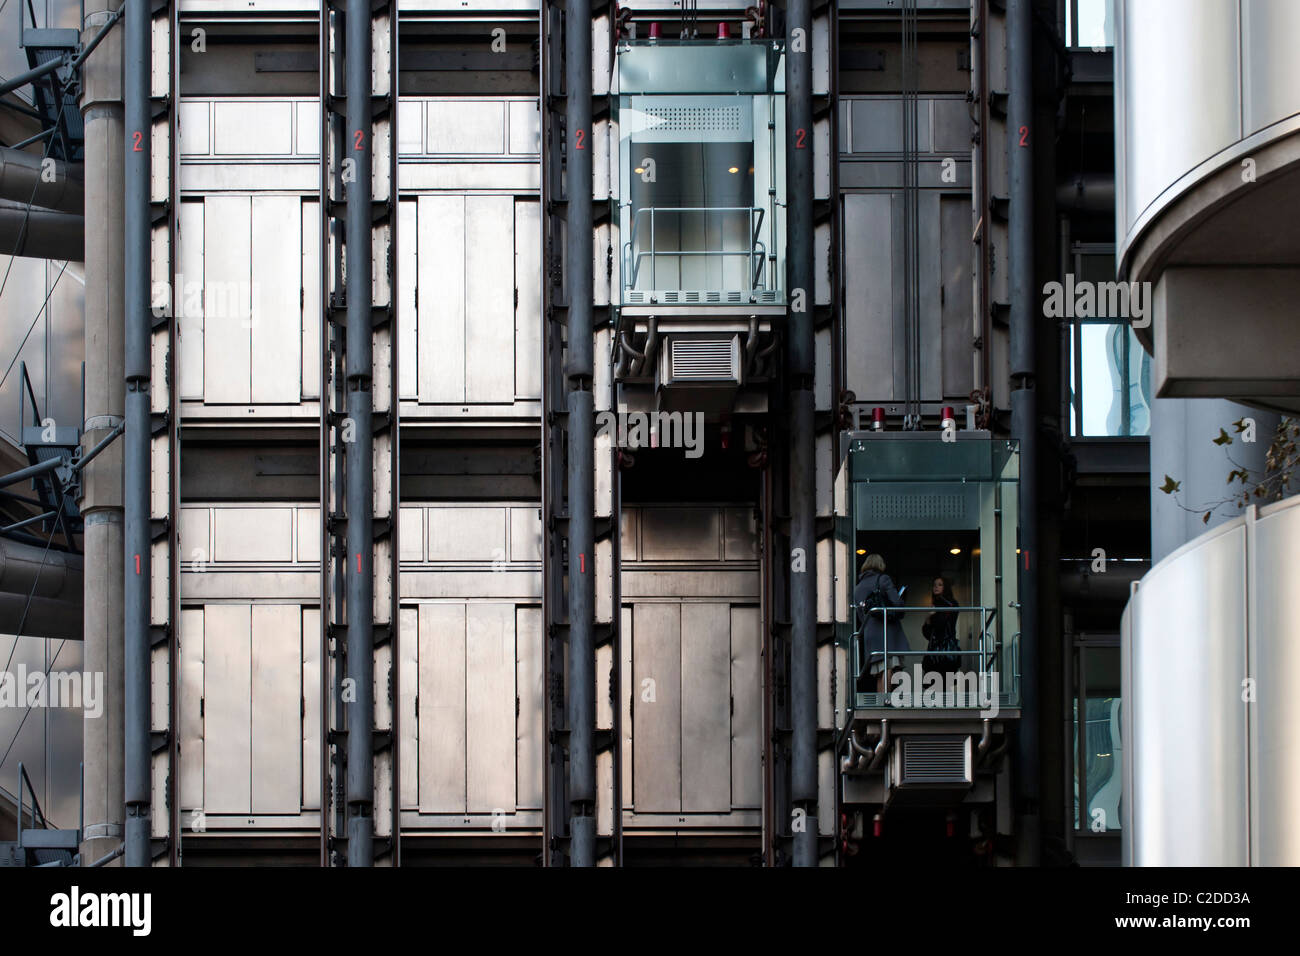 Stainless steel and glass lifts of the Lloyds insurance building in the City of London Stock Photo